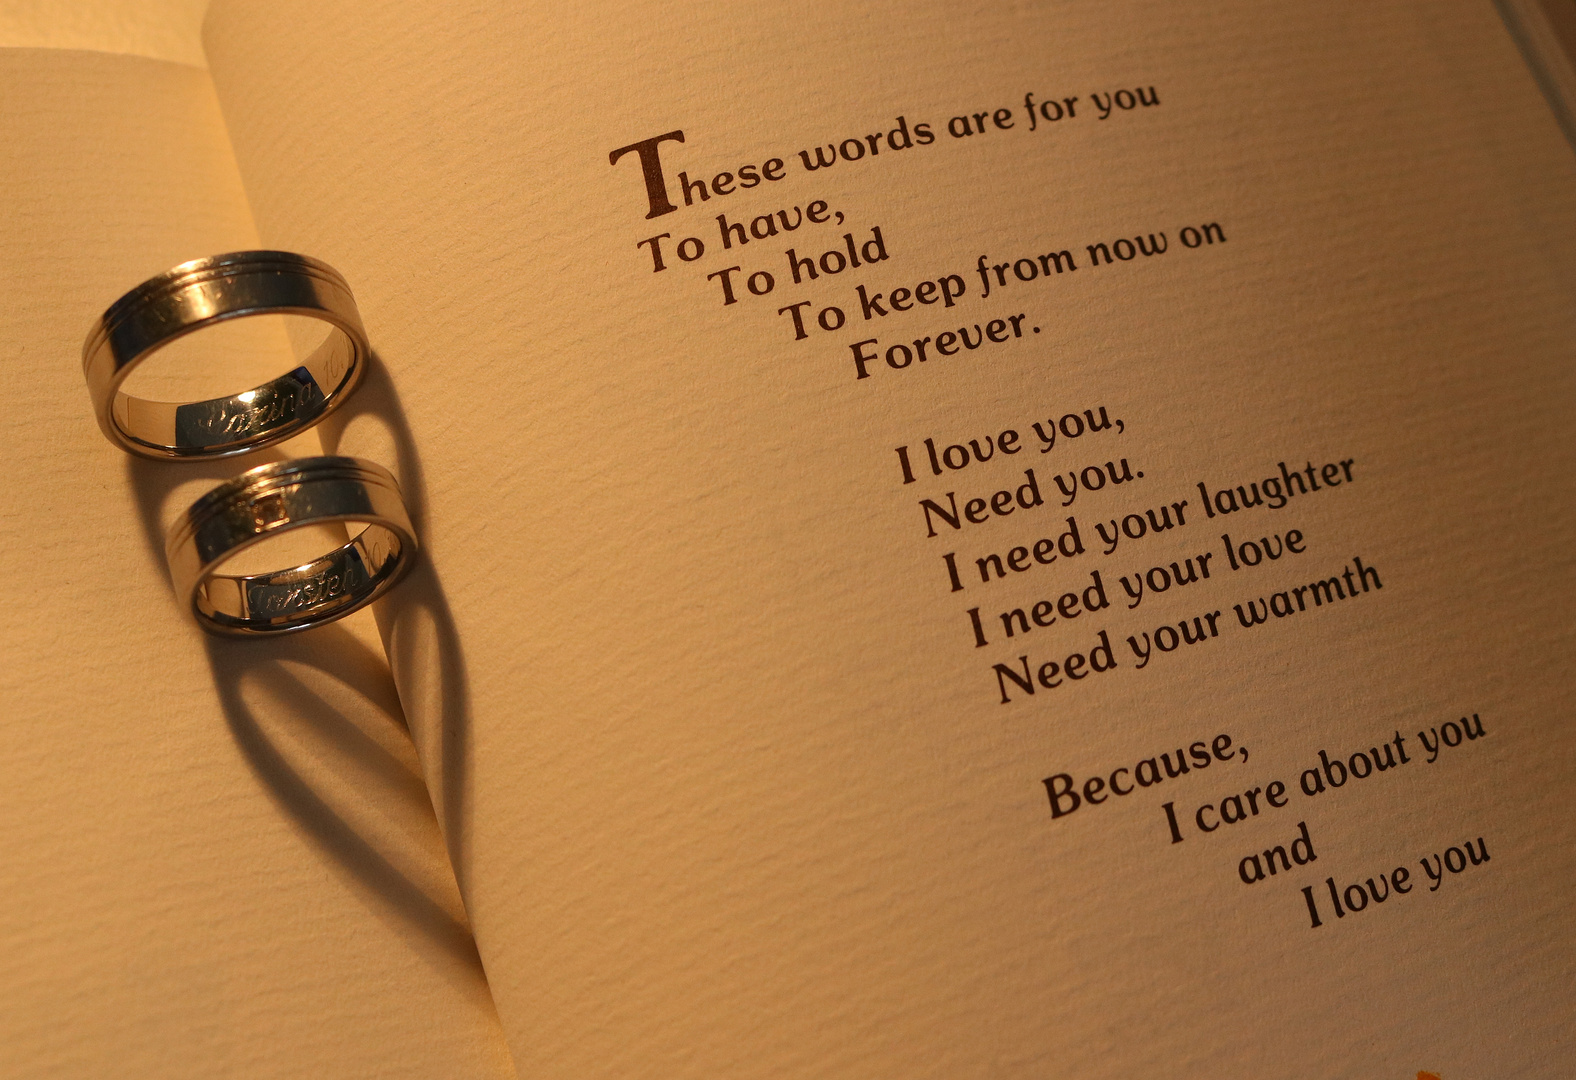 These words are for you...